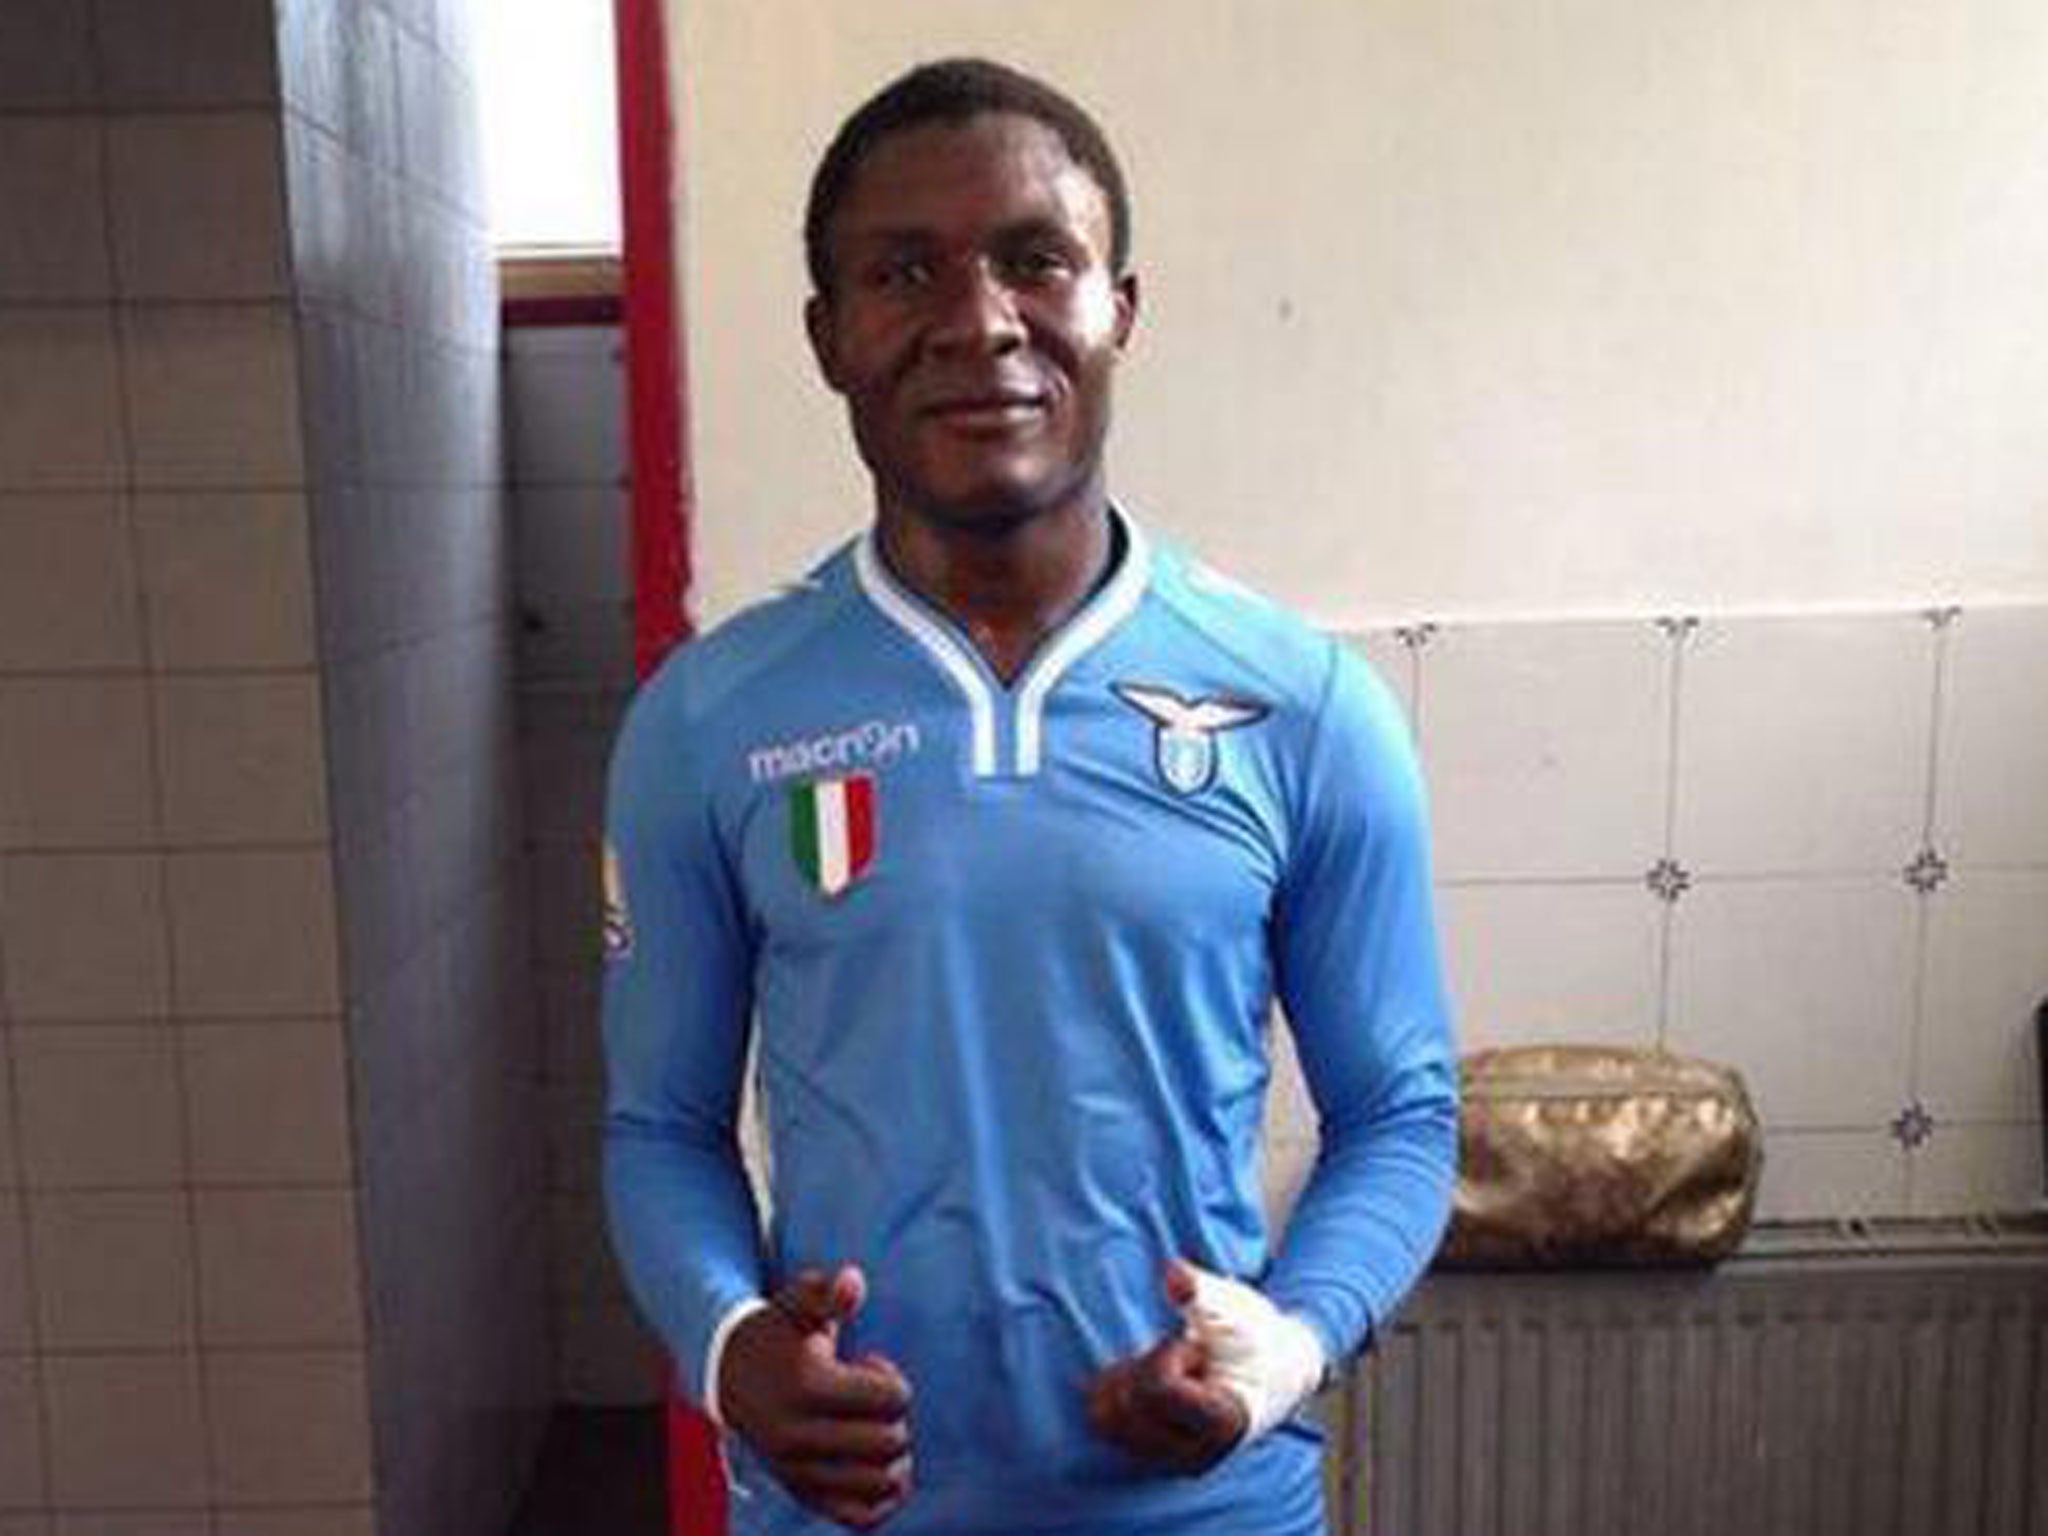 Lazio have threatened legal action over those who question the age of their 17-year-old player Joseph Minala